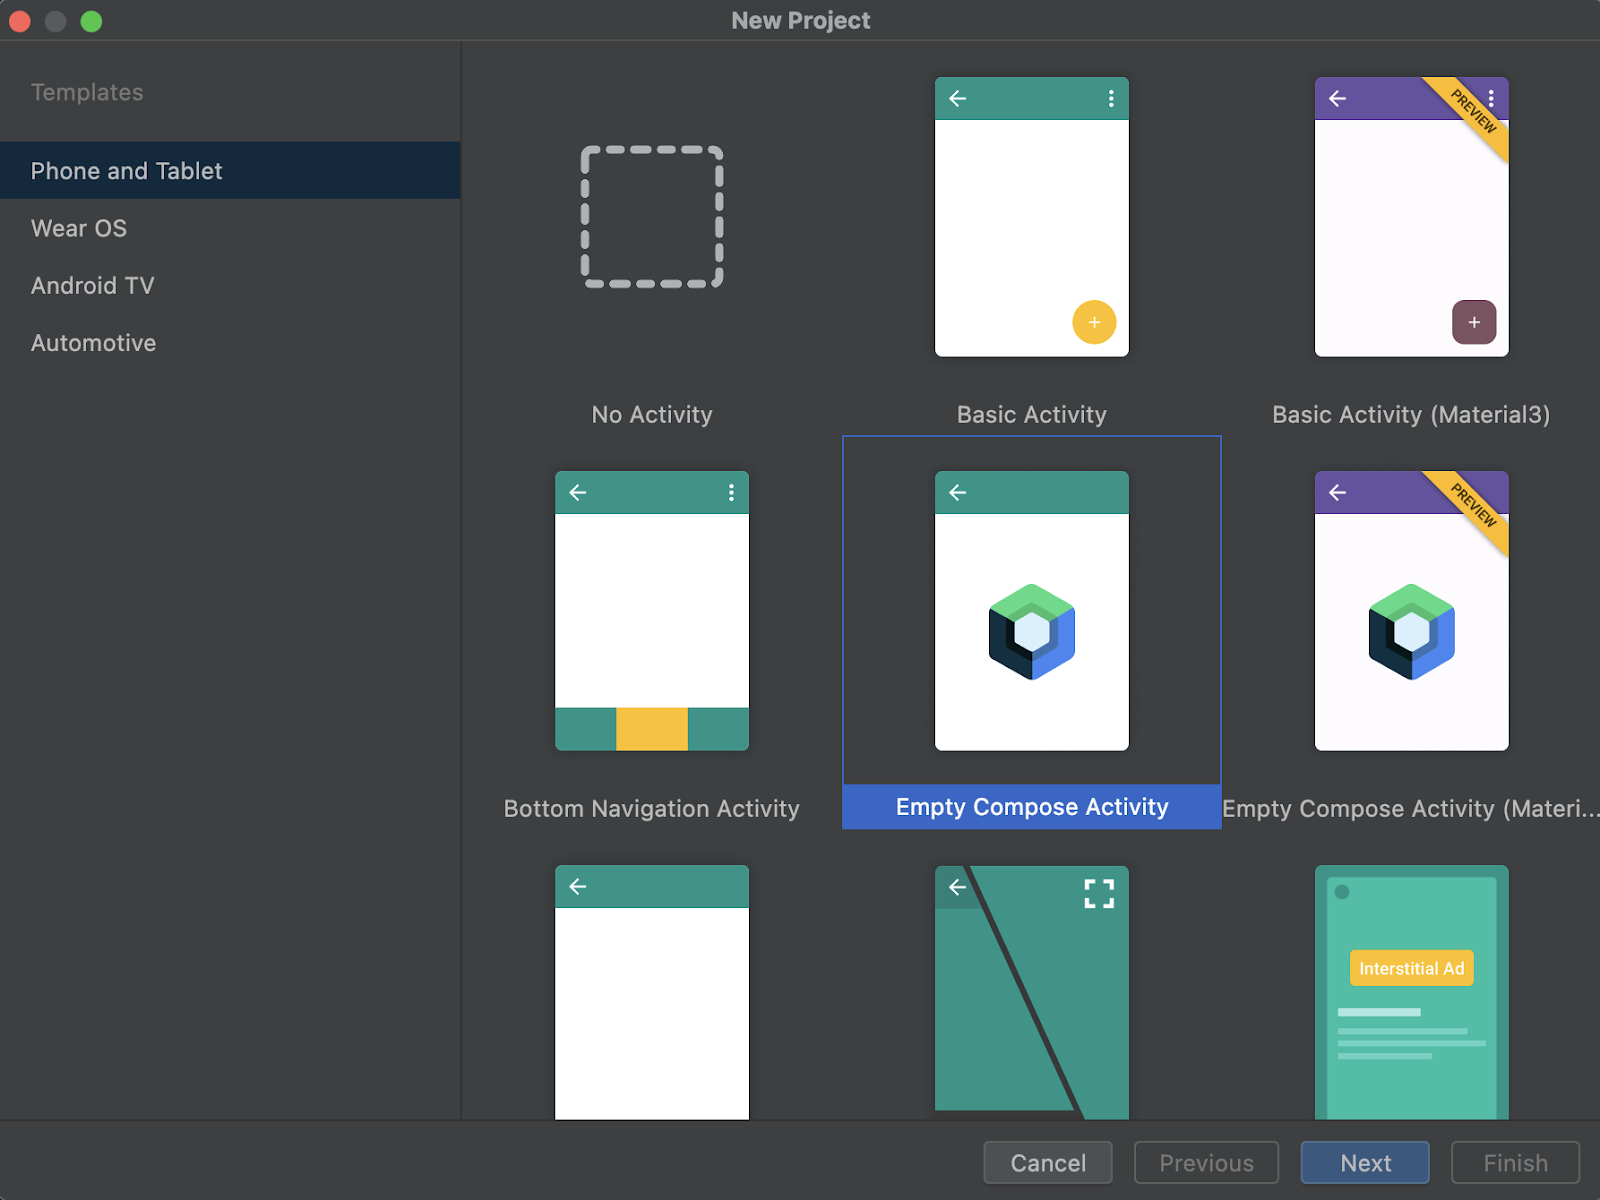 Template selection in Android Studio